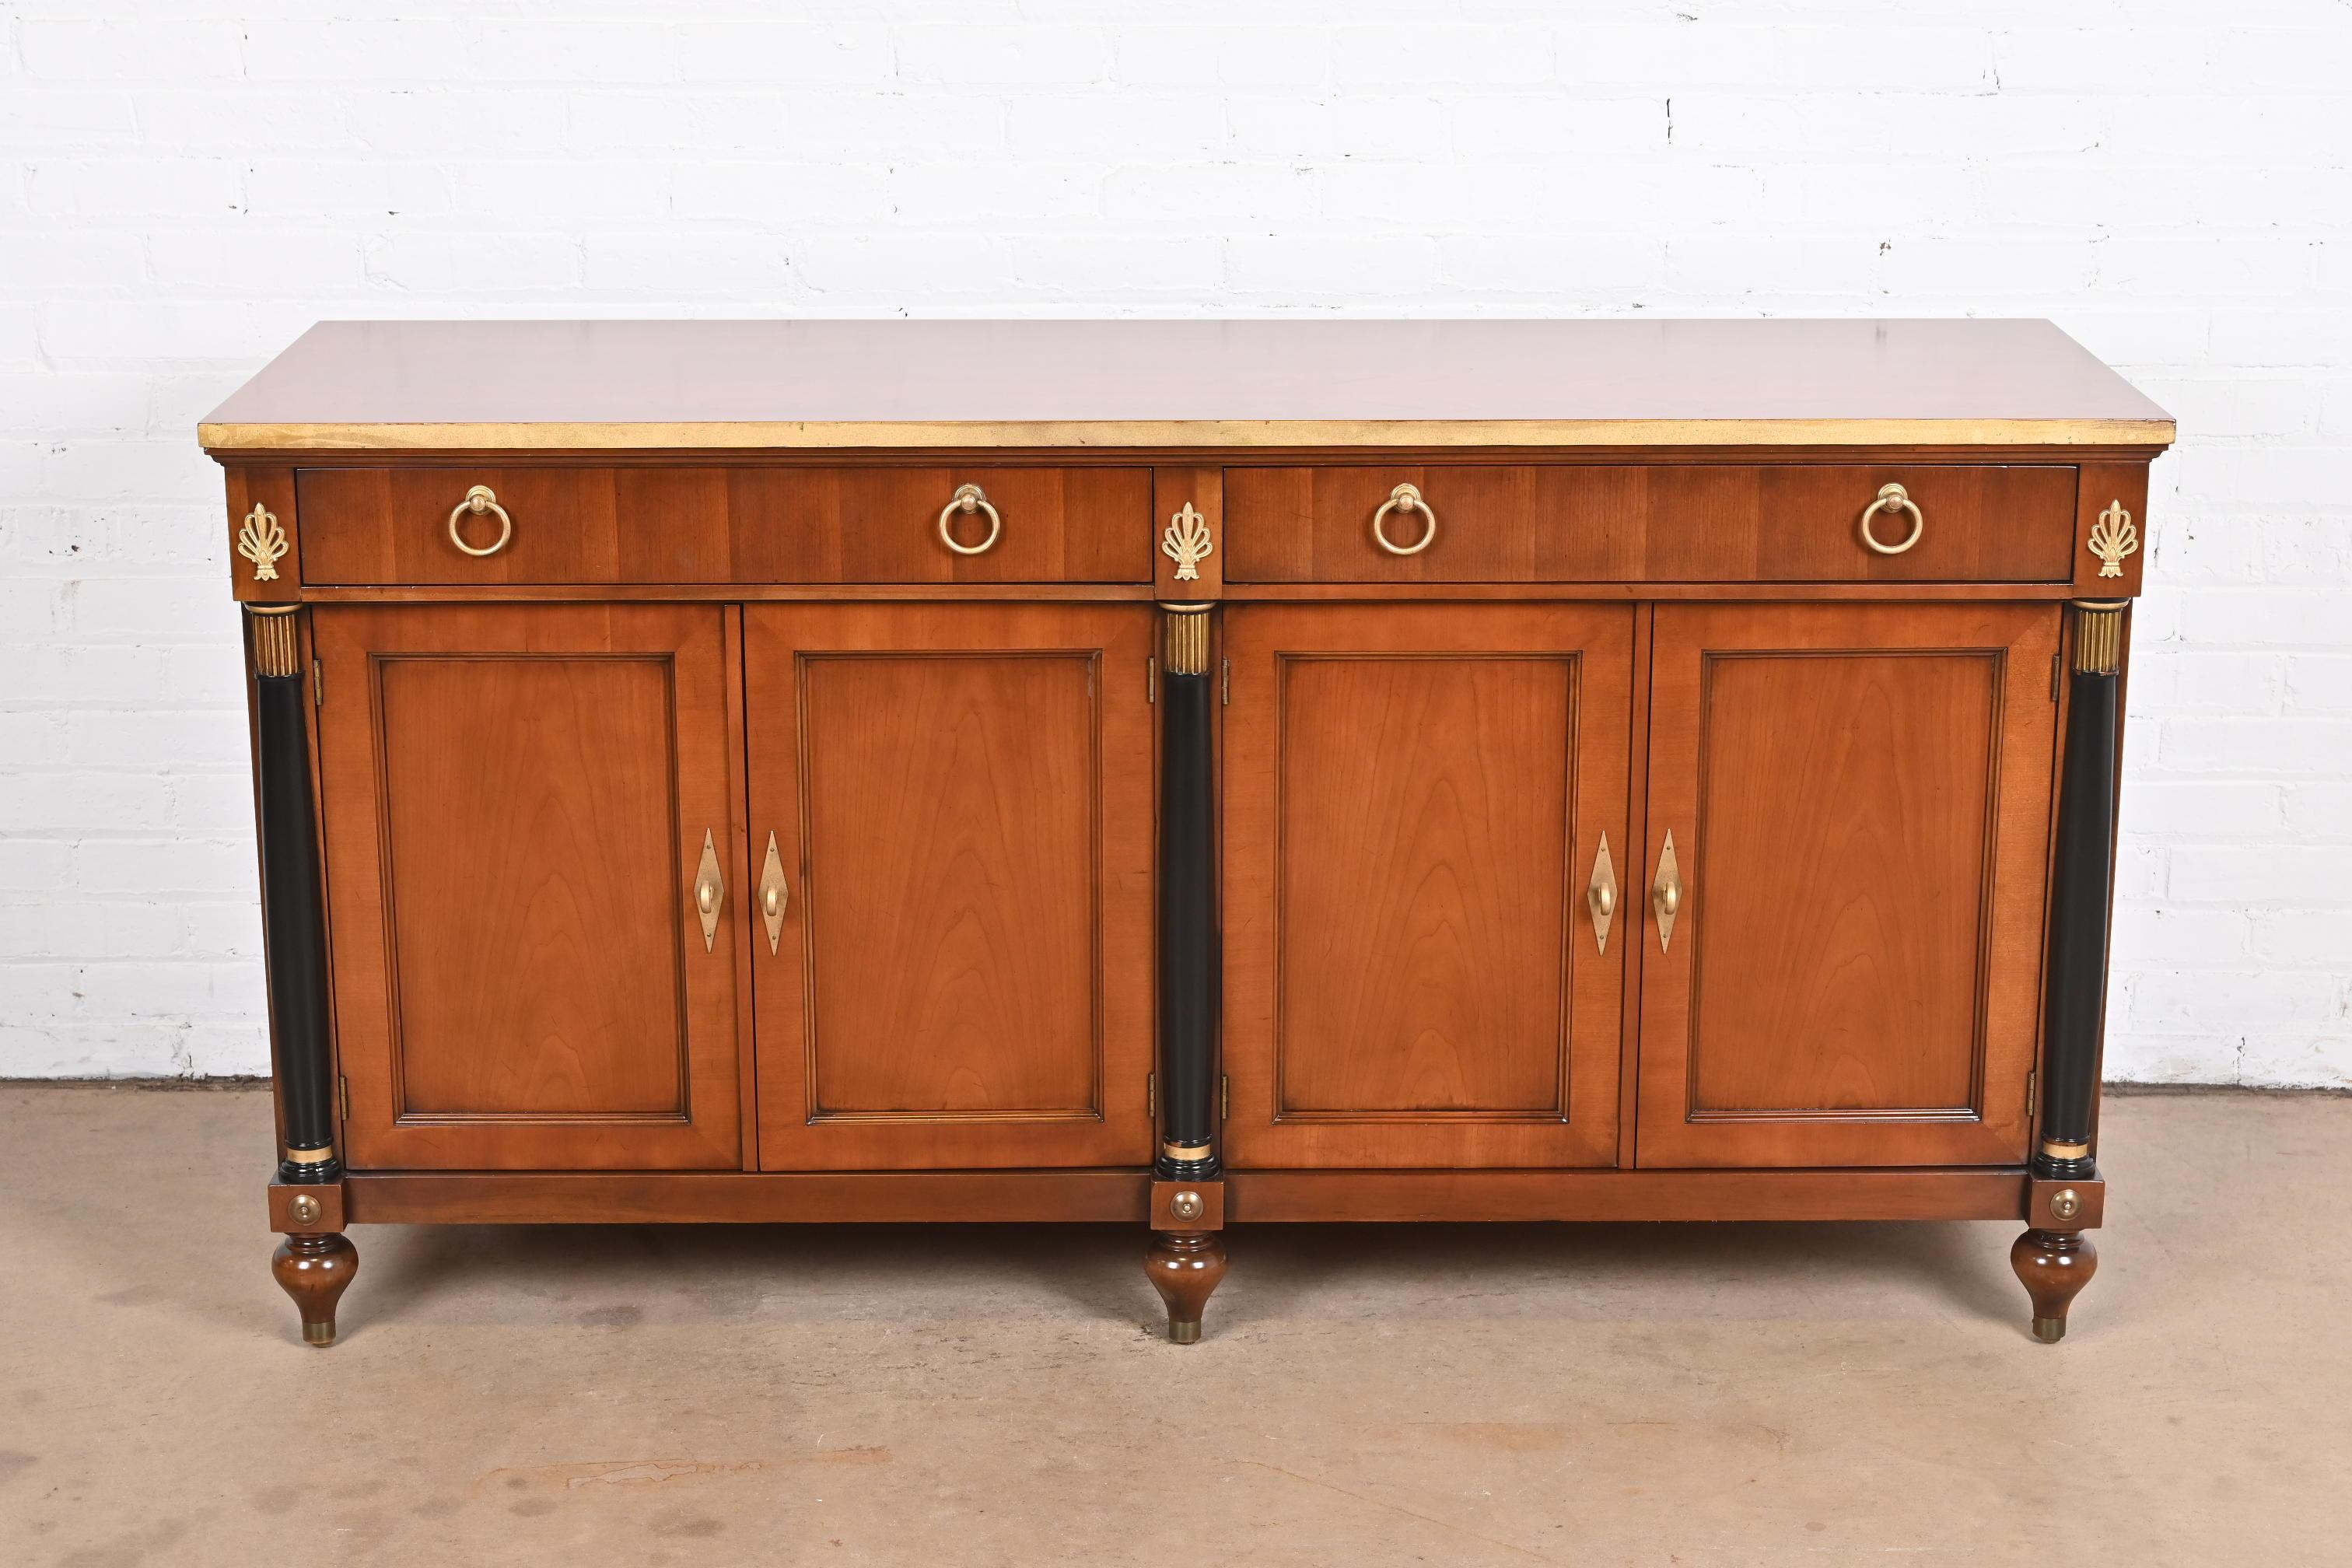 A gorgeous French Regency Louis XVI or Empire style sideboard, credenza, or bar cabinet

By Baker Furniture

USA, circa 1980s

Carved cherry wood, with ebonized columns, gilt trim, and original brass hardware.

Measures: 64